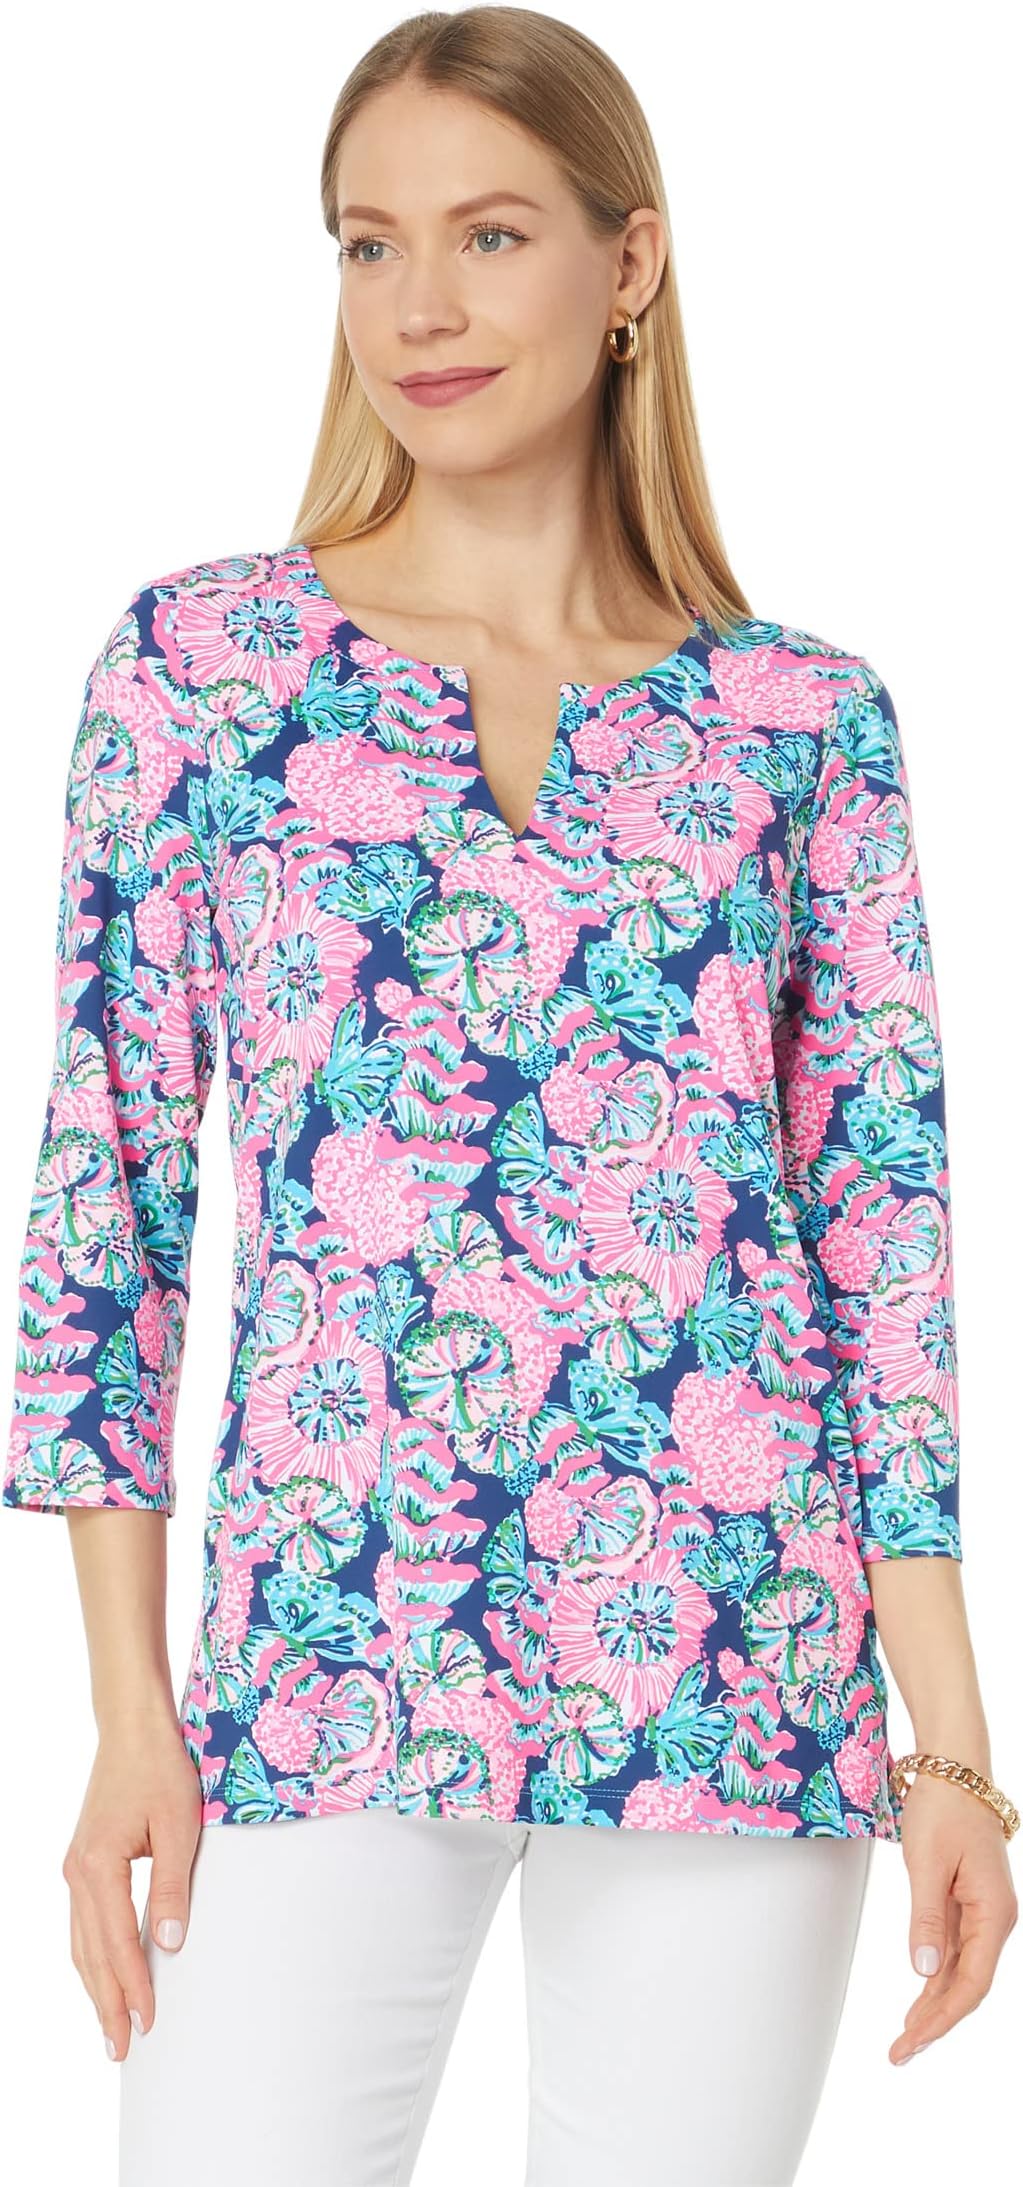 UPF 50+ Туника Карина Lilly Pulitzer, цвет Oyster Bay Navy Shroom with A View